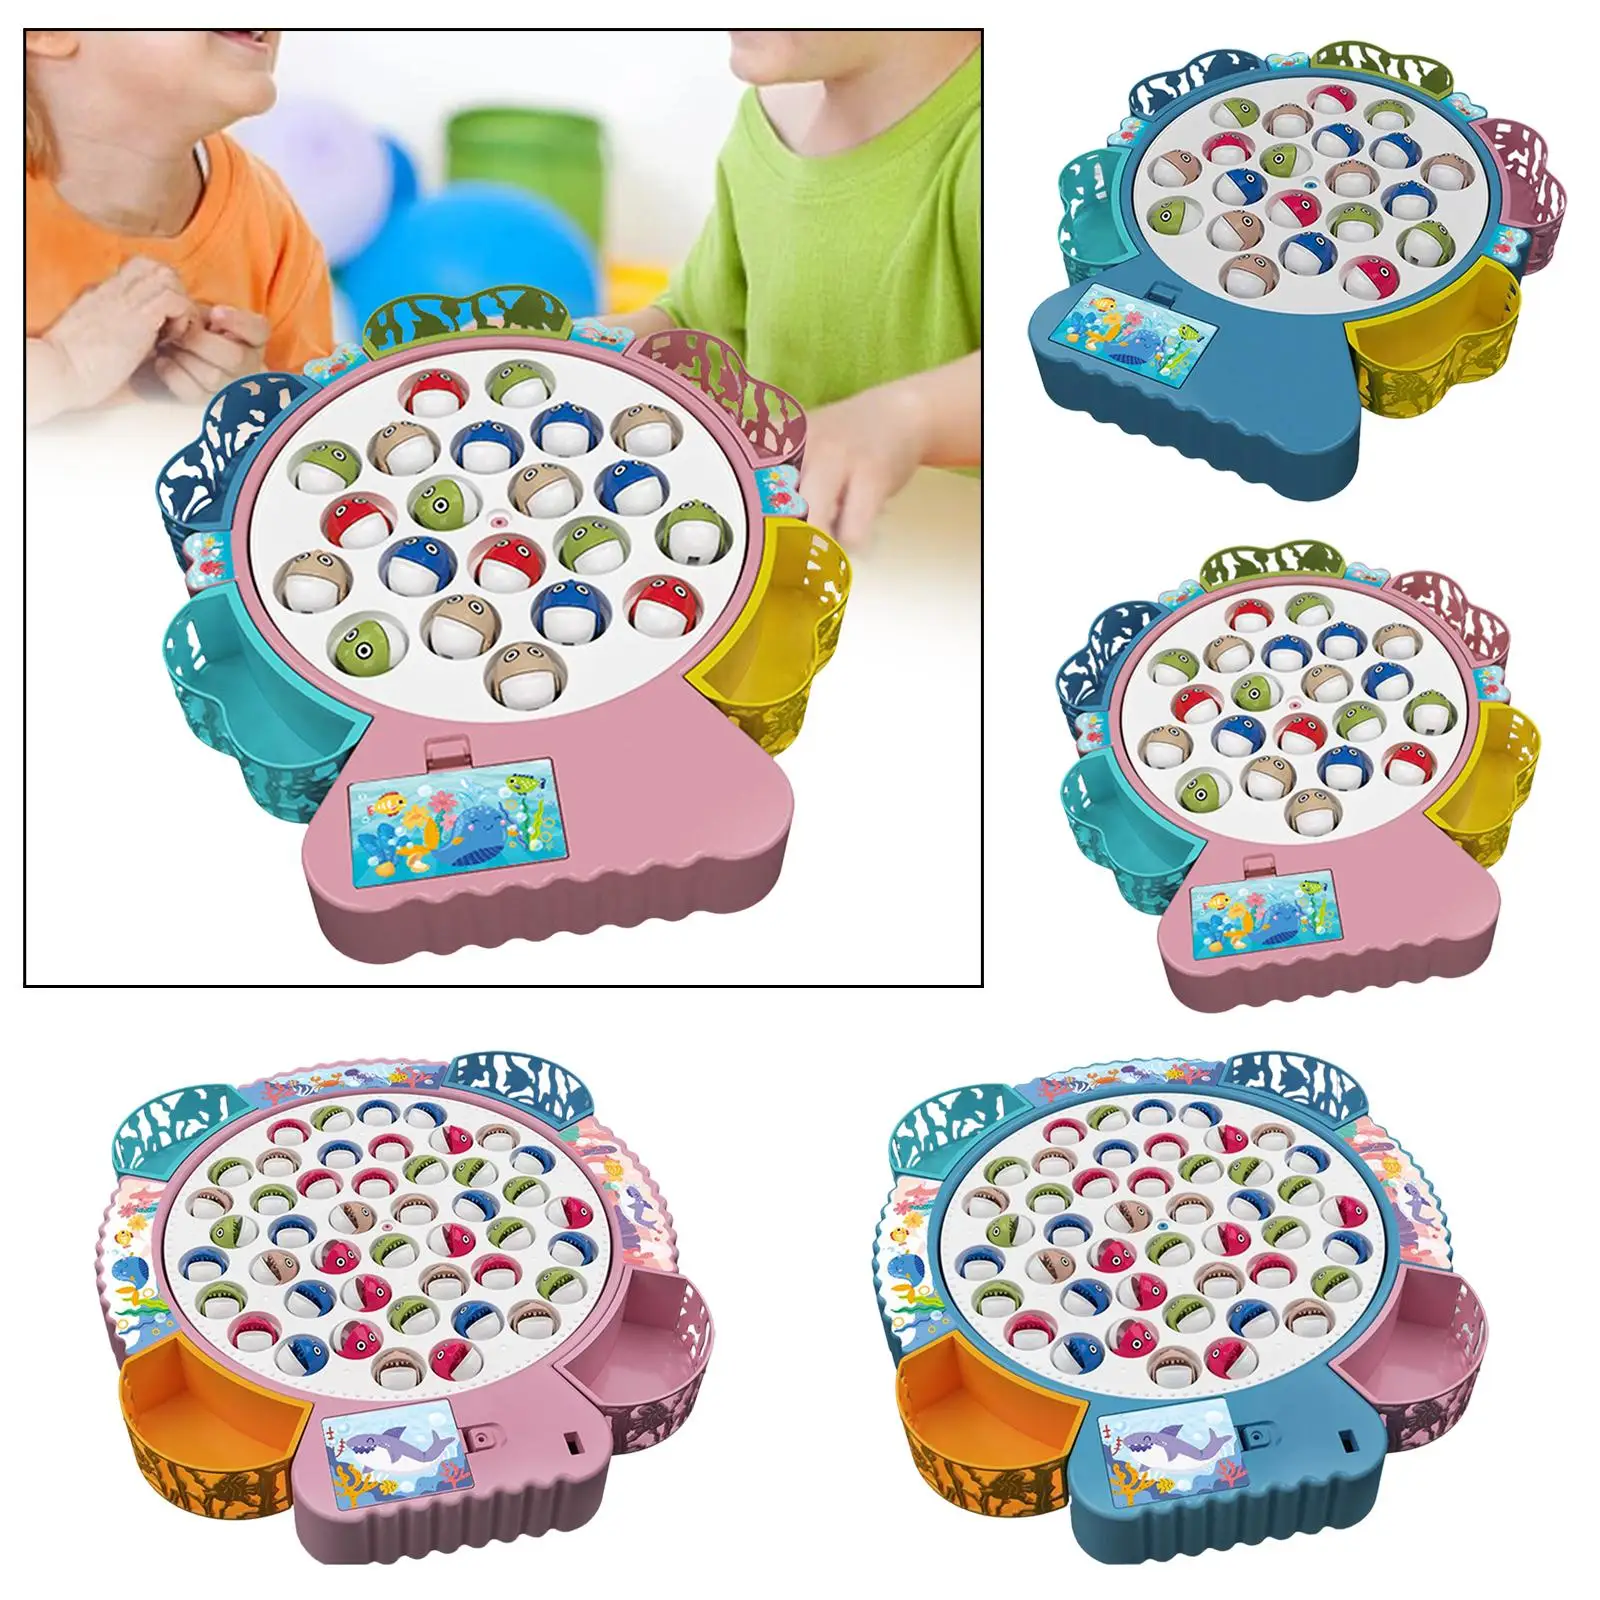 Fishing Game for 1-4 Player Colorful Role Play Electric Fishing Toy for Backyard Party Favors Family Preschool Age 3 4 5 6 7